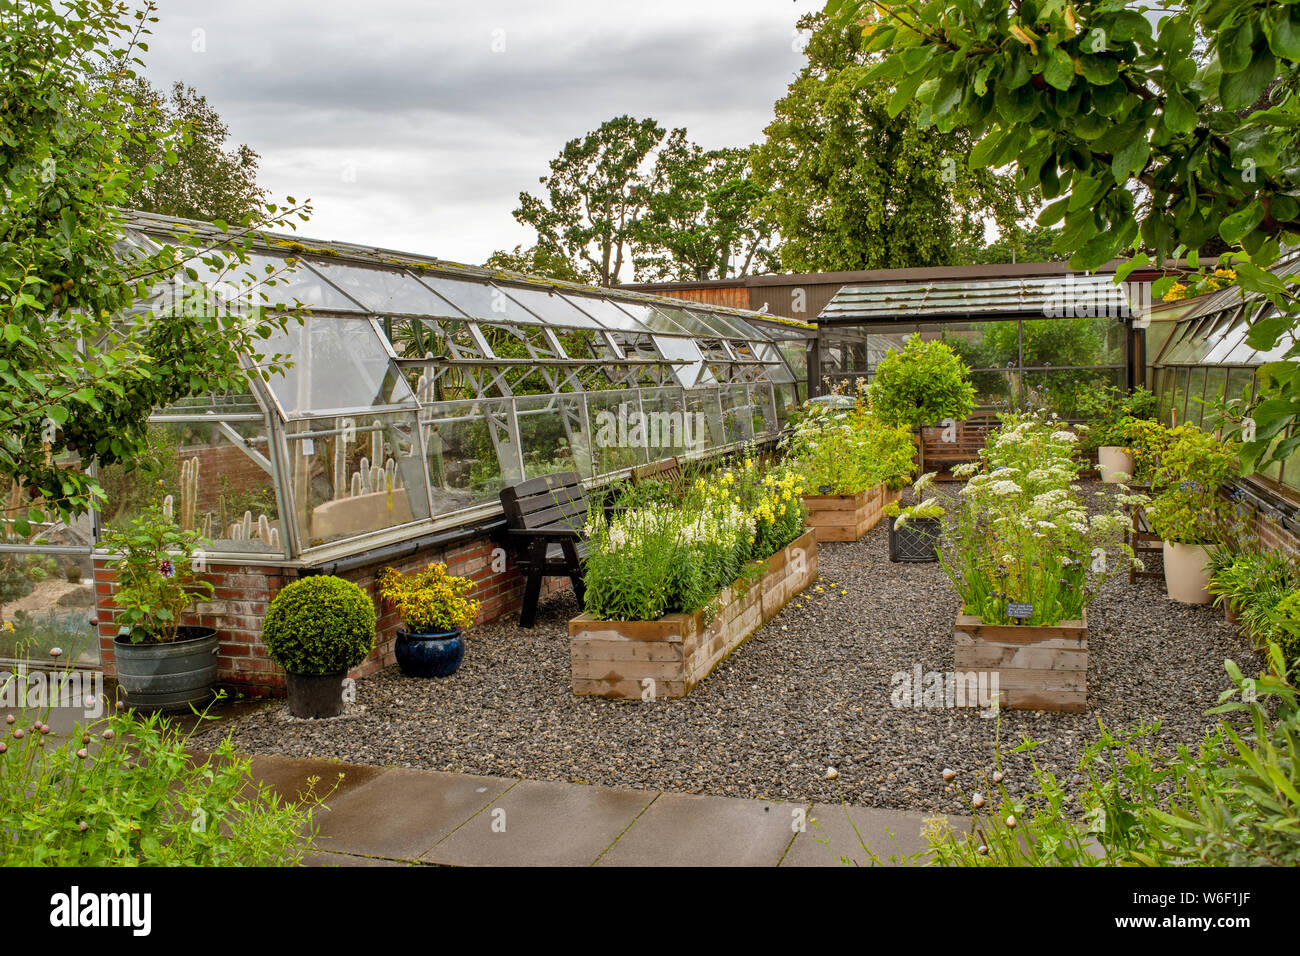 INVERNESS SCOTLAND THE BOTANIC GARDENS PATIO WITH CHAIRS GREENHOUSES AND A  VARIETY OF FLOWERS IN WOODEN CONTAINERS Stock Photo - Alamy